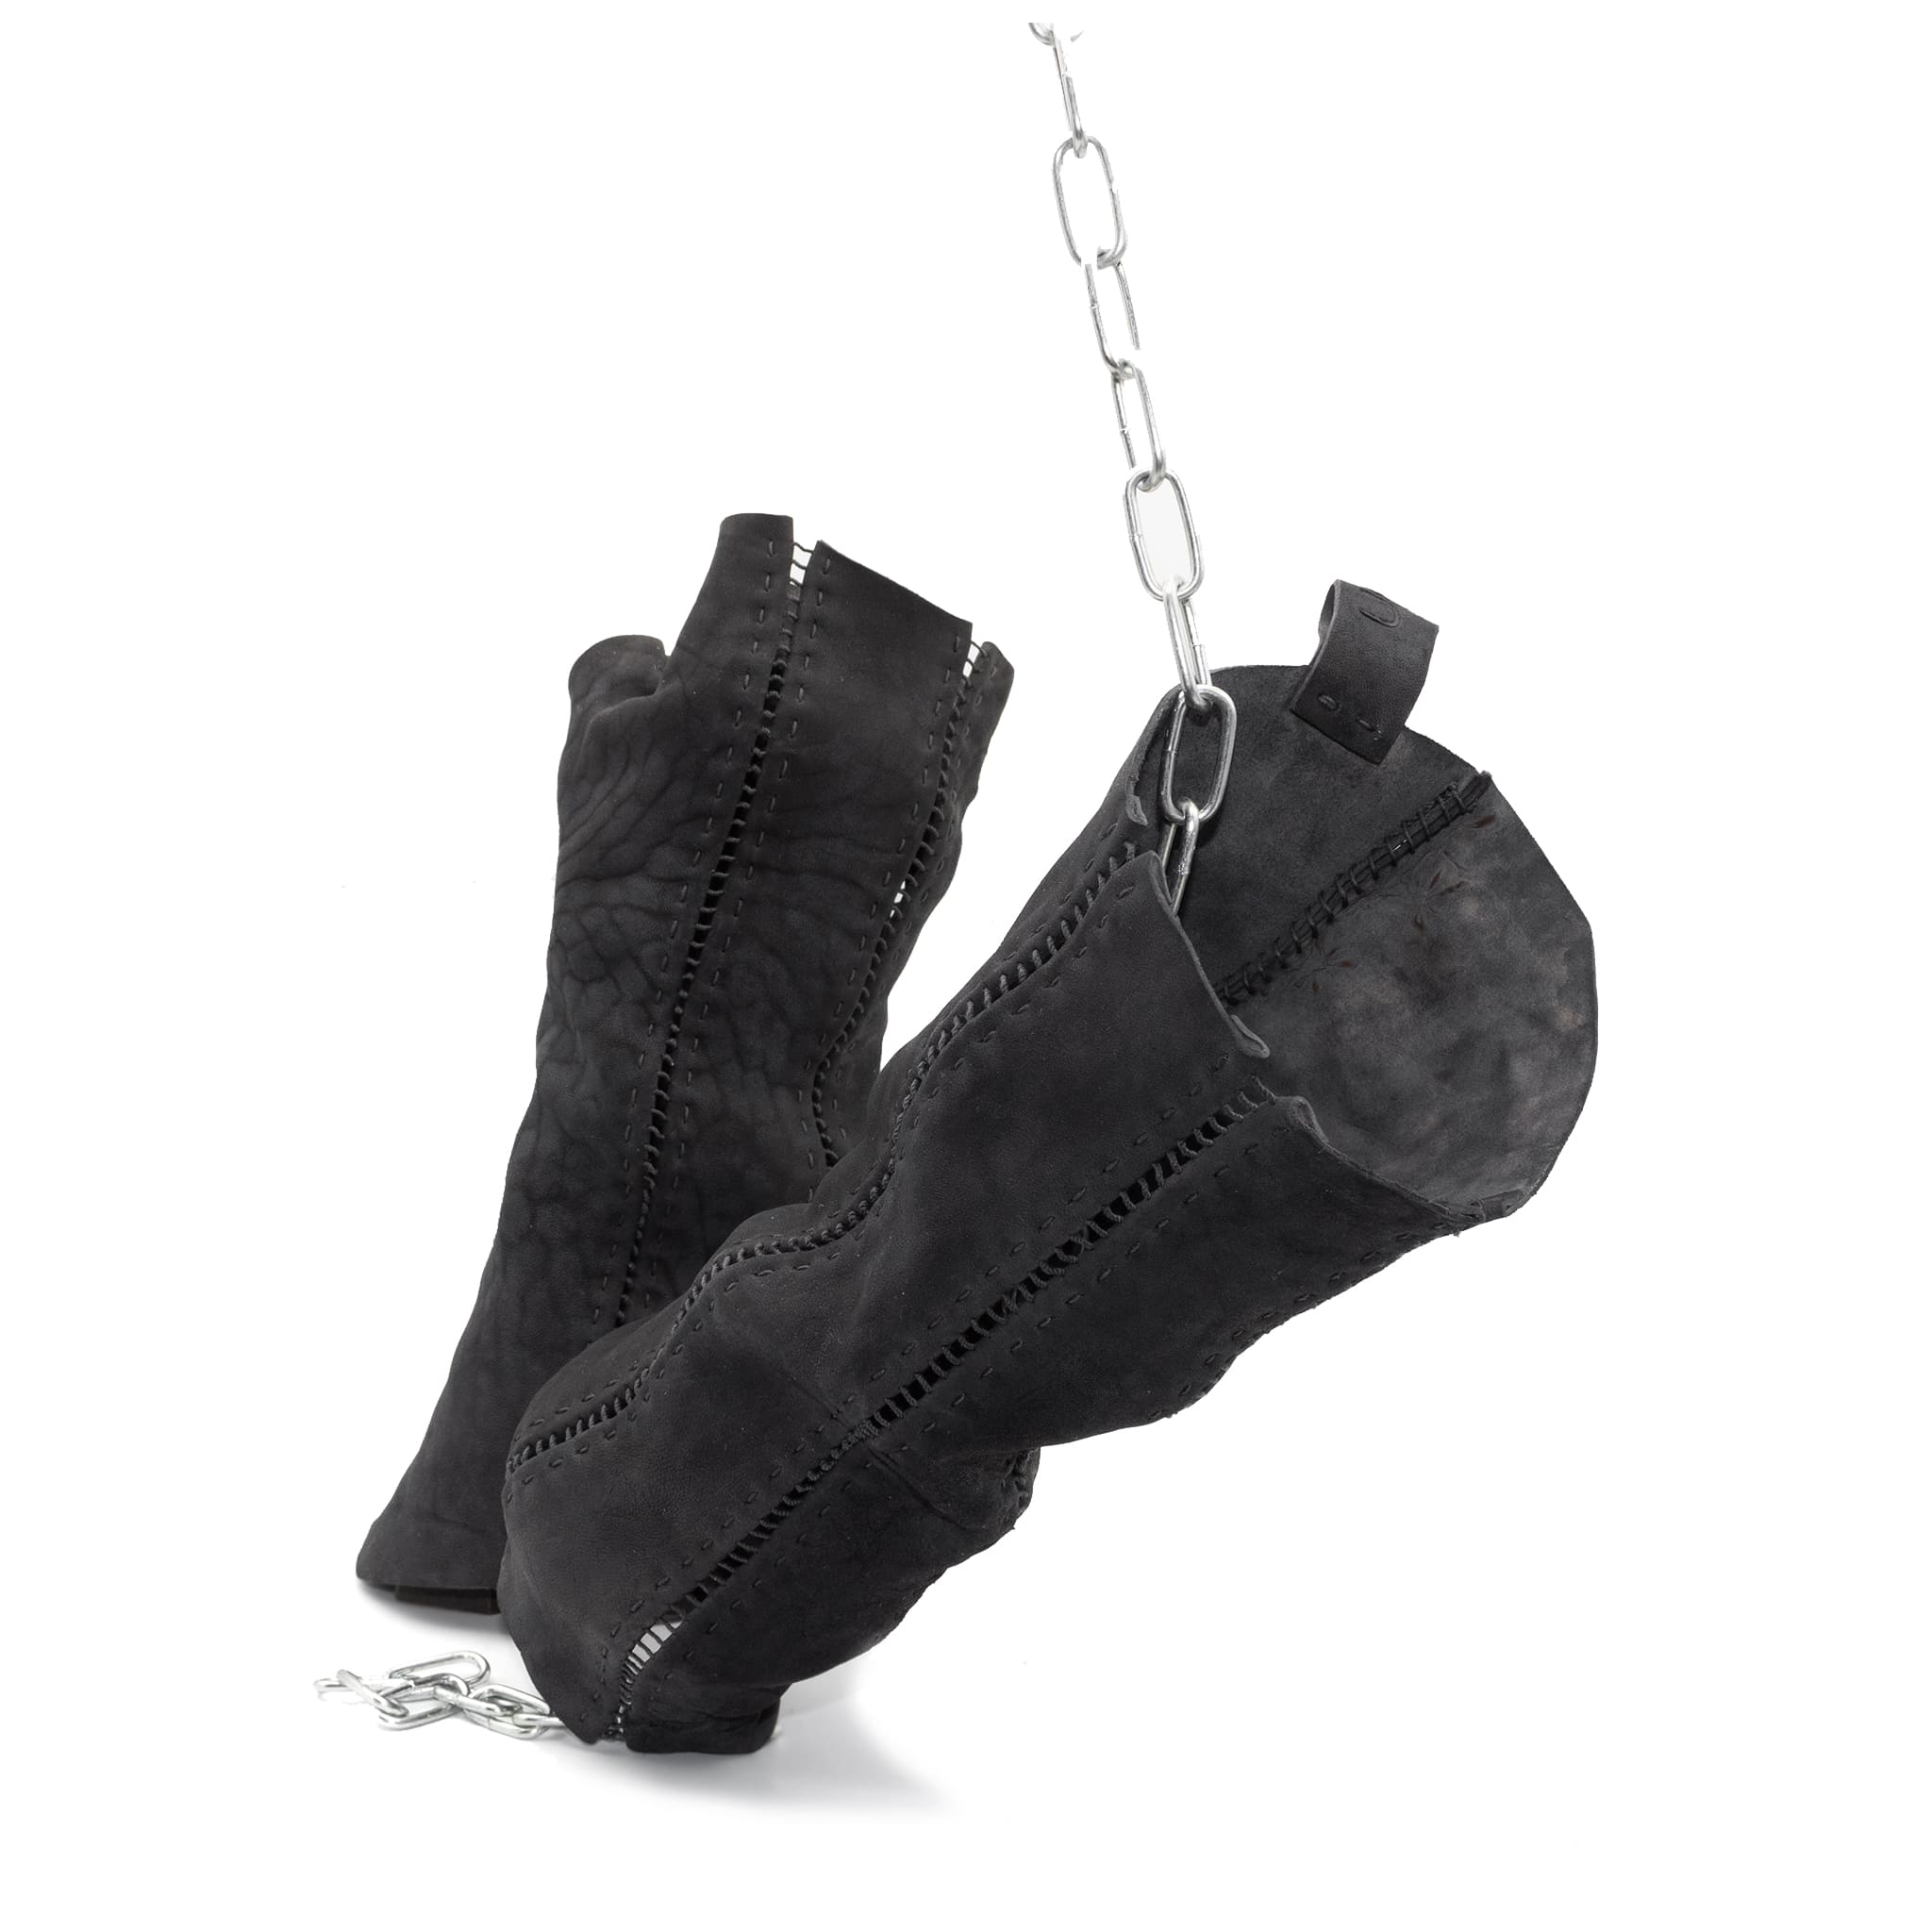 horse culatta open seam long leather gloves available online at atelierskn.com